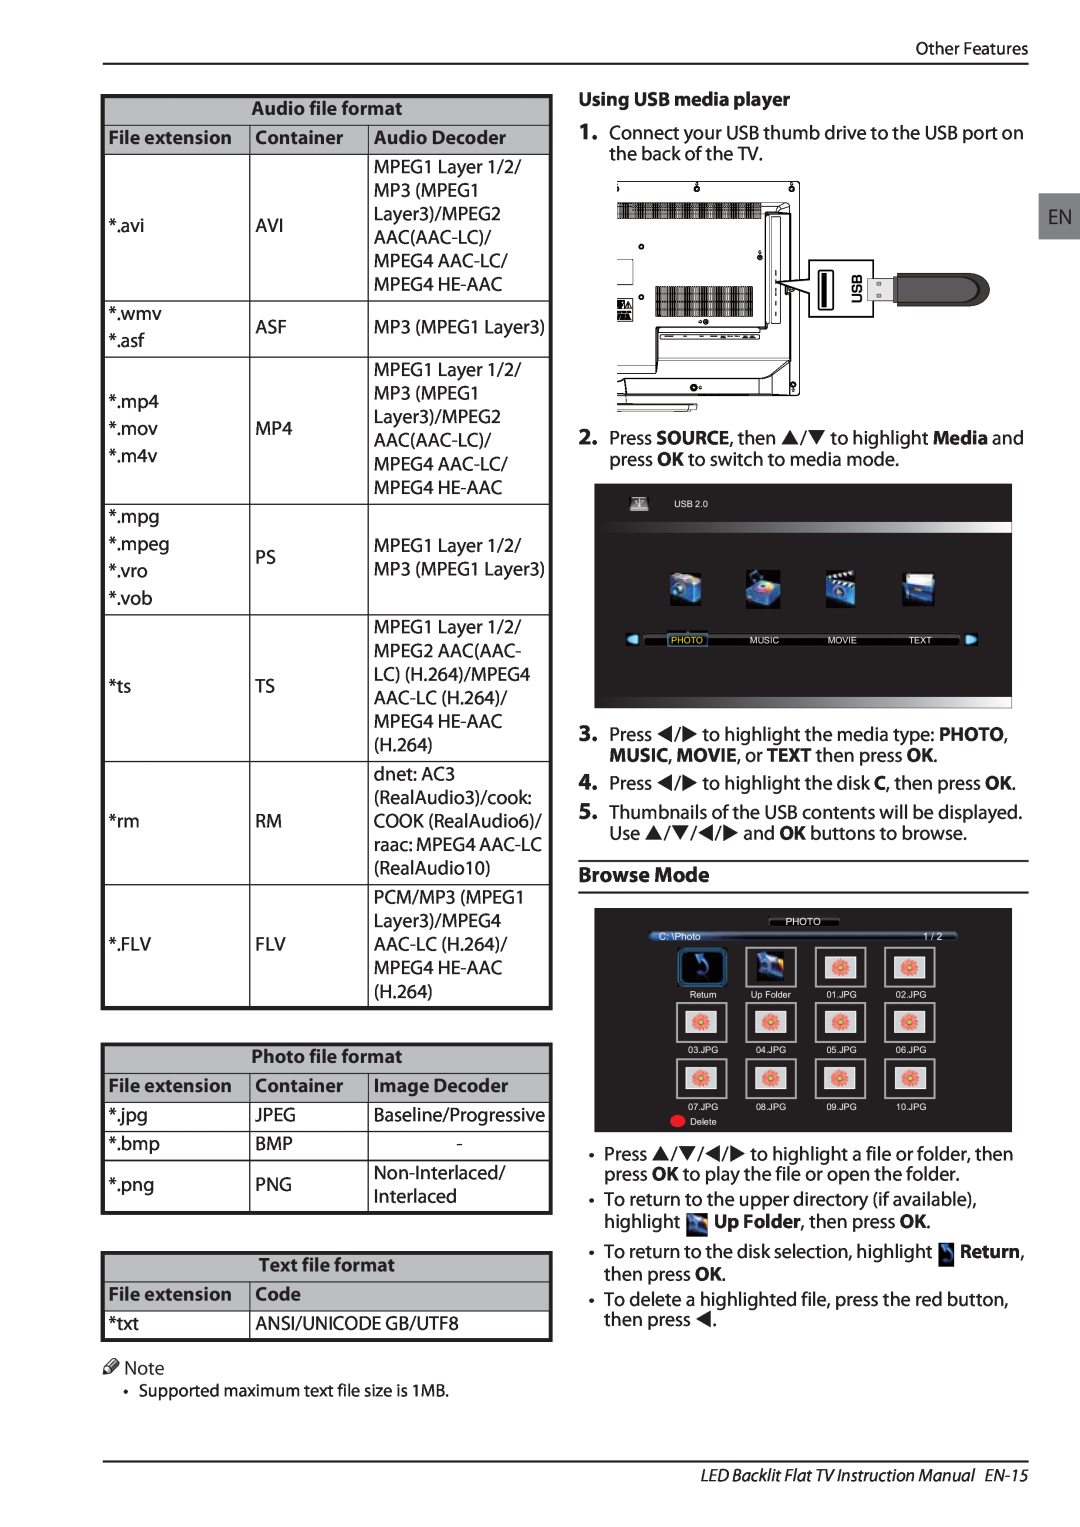 Haier LE32F600, LE32A650 owner manual Browse Mode, Press W/X to highlight the disk C, then press OK 